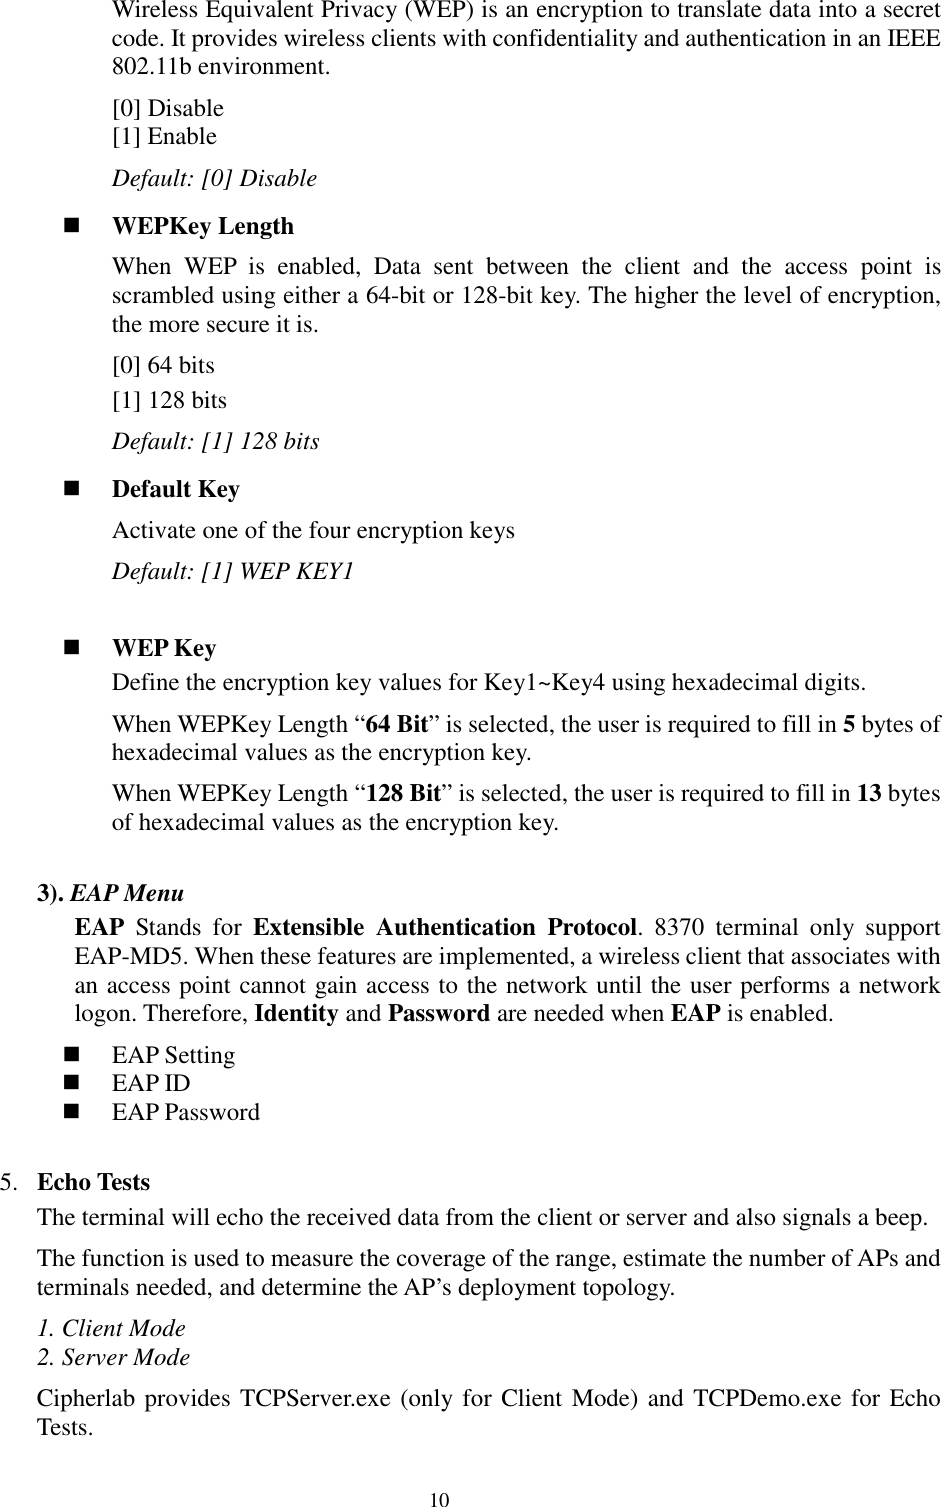  10Wireless Equivalent Privacy (WEP) is an encryption to translate data into a secret code. It provides wireless clients with confidentiality and authentication in an IEEE 802.11b environment. [0] Disable [1] Enable Default: [0] Disable  WEPKey Length When WEP is enabled, Data sent between the client and the access point is scrambled using either a 64-bit or 128-bit key. The higher the level of encryption, the more secure it is. [0] 64 bits [1] 128 bits Default: [1] 128 bits  Default Key Activate one of the four encryption keys Default: [1] WEP KEY1    WEP Key Define the encryption key values for Key1~Key4 using hexadecimal digits.  When WEPKey Length “64 Bit” is selected, the user is required to fill in 5 bytes of hexadecimal values as the encryption key. When WEPKey Length “128 Bit” is selected, the user is required to fill in 13 bytes of hexadecimal values as the encryption key.   3). EAP Menu EAP Stands for Extensible Authentication Protocol. 8370 terminal only support EAP-MD5. When these features are implemented, a wireless client that associates with an access point cannot gain access to the network until the user performs a network logon. Therefore, Identity and Password are needed when EAP is enabled.   EAP Setting  EAP ID  EAP Password  5. Echo Tests The terminal will echo the received data from the client or server and also signals a beep. The function is used to measure the coverage of the range, estimate the number of APs and terminals needed, and determine the AP’s deployment topology.  1. Client Mode 2. Server Mode Cipherlab provides TCPServer.exe (only for Client Mode) and TCPDemo.exe for Echo Tests.  